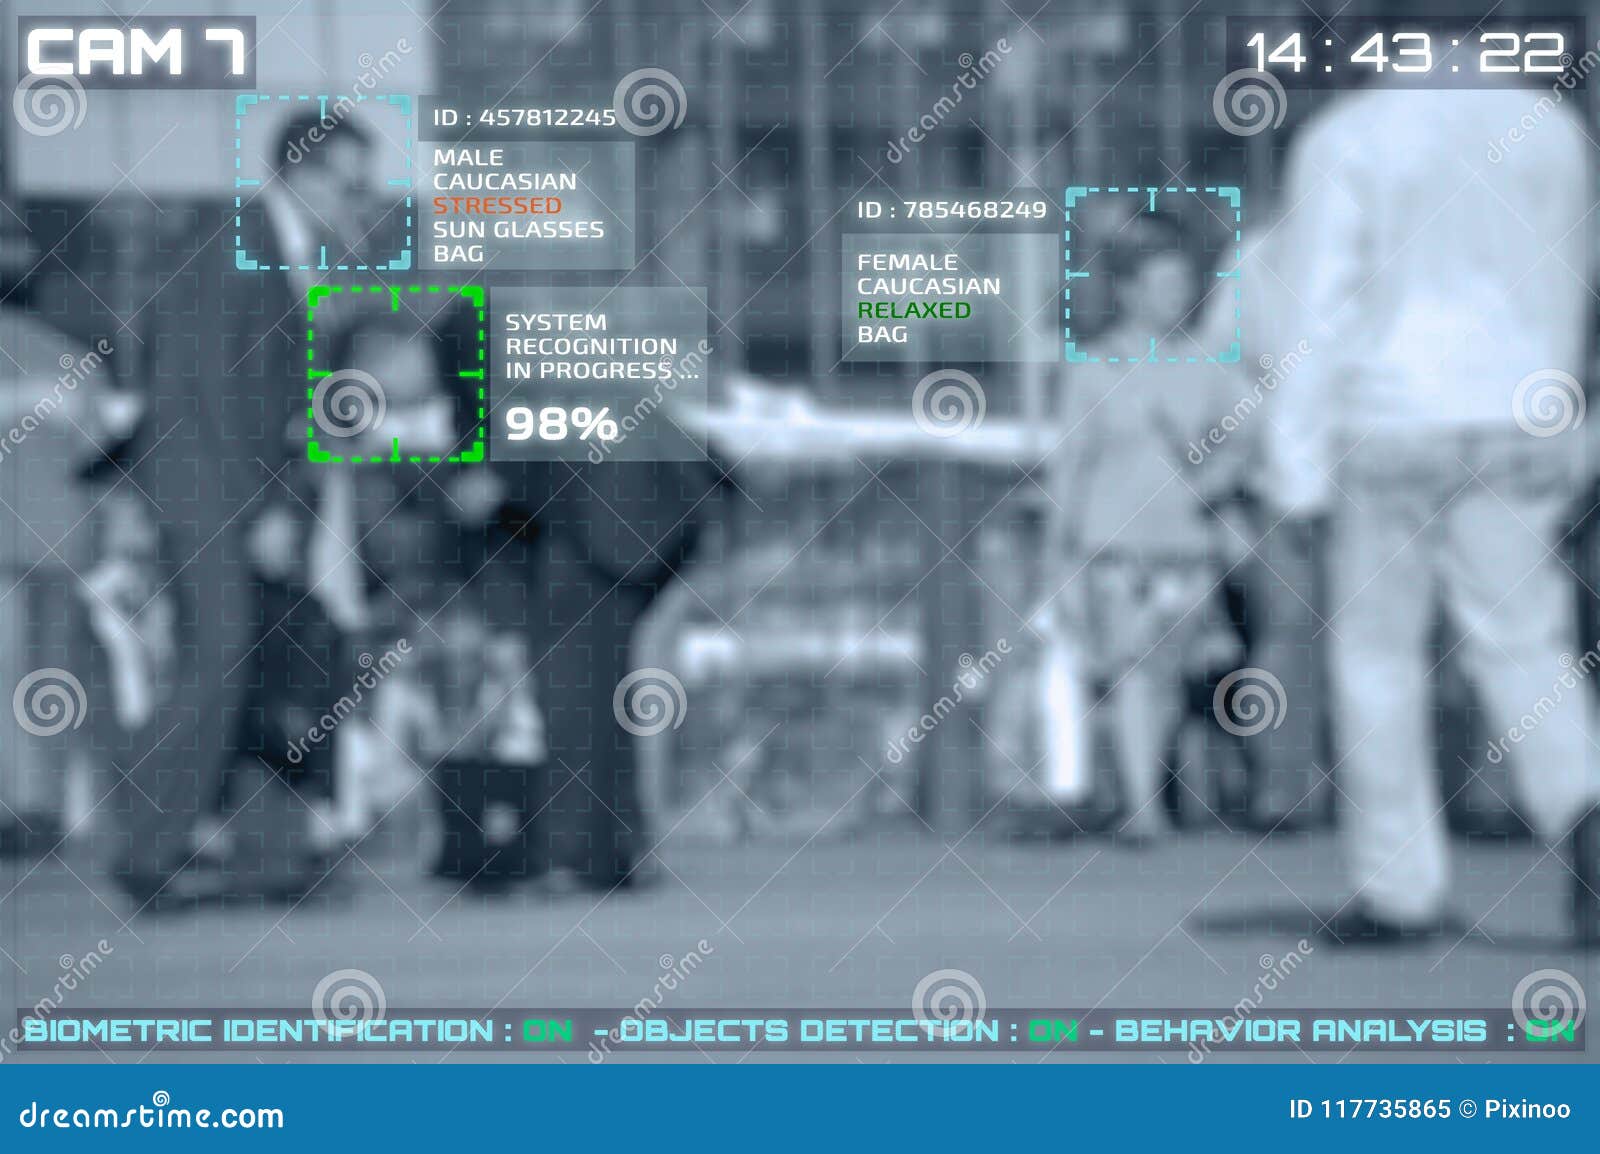 simulation of a screen of cctv cameras with facial recognition